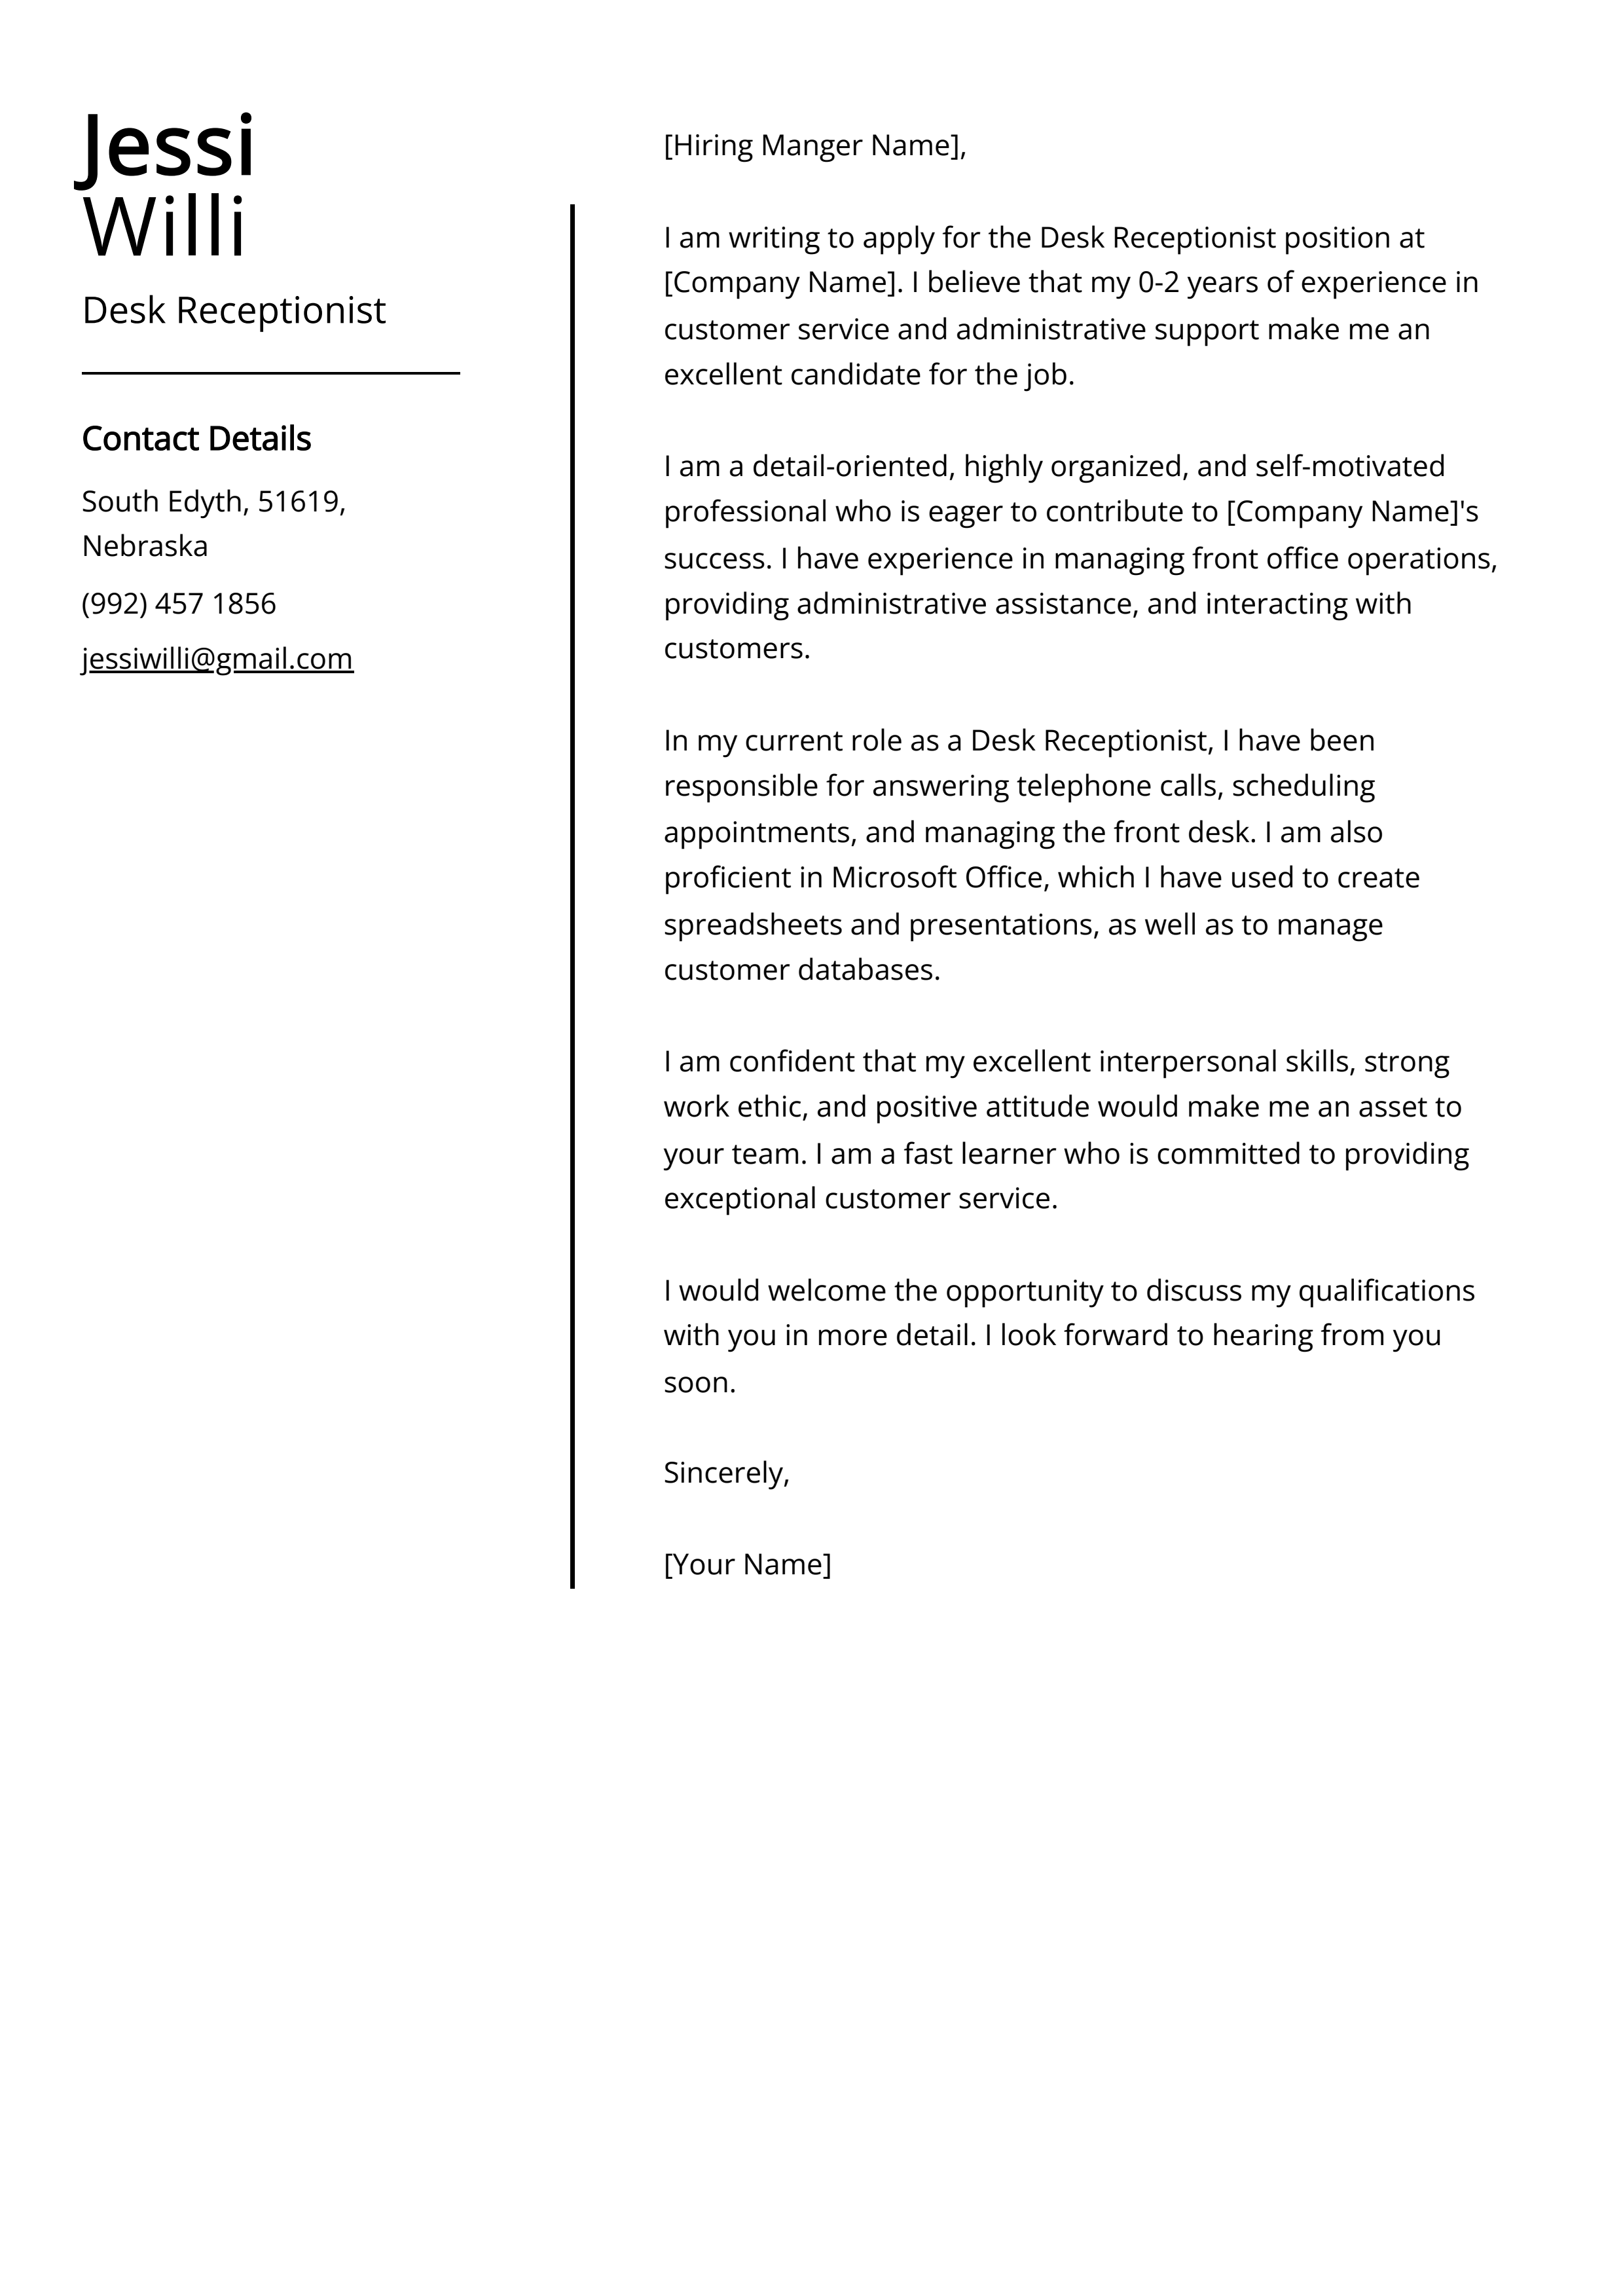 Desk Receptionist Cover Letter Example